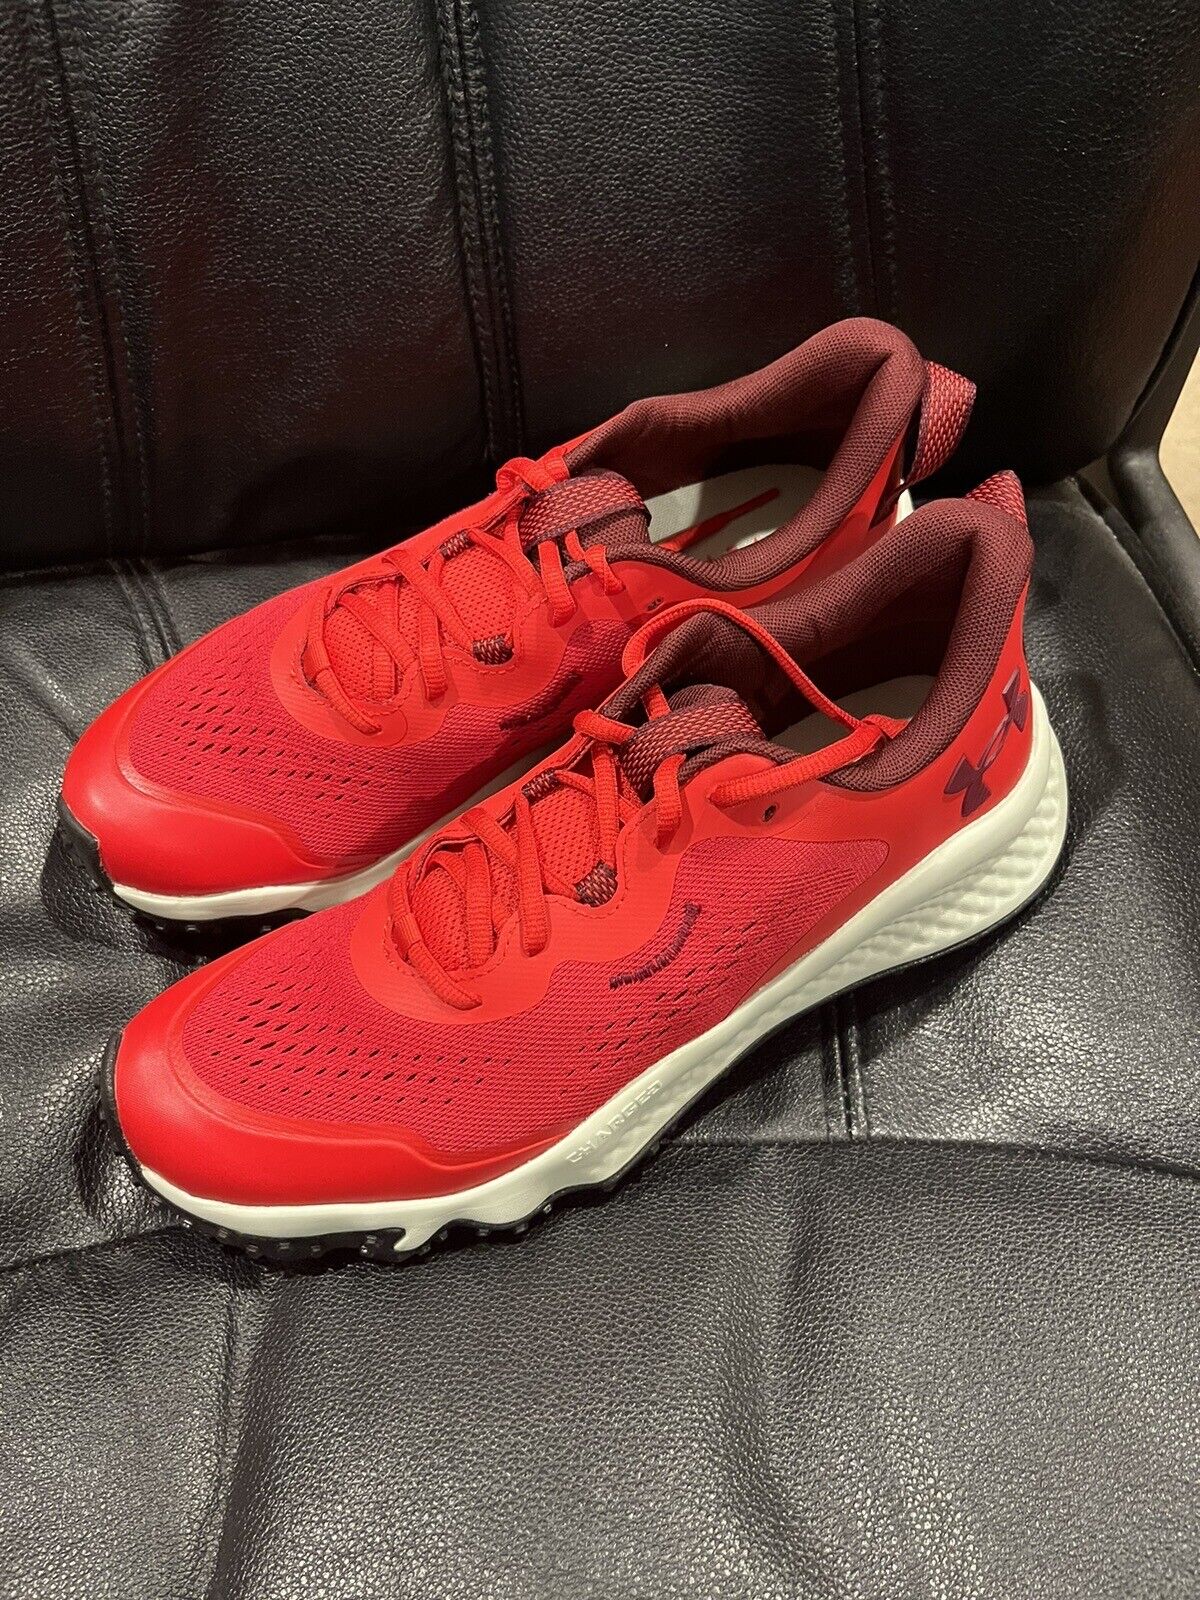 Nice Under Armour Charged Maven Trail Running Shoes Red White Men’s Size 11 Brand New on eBay